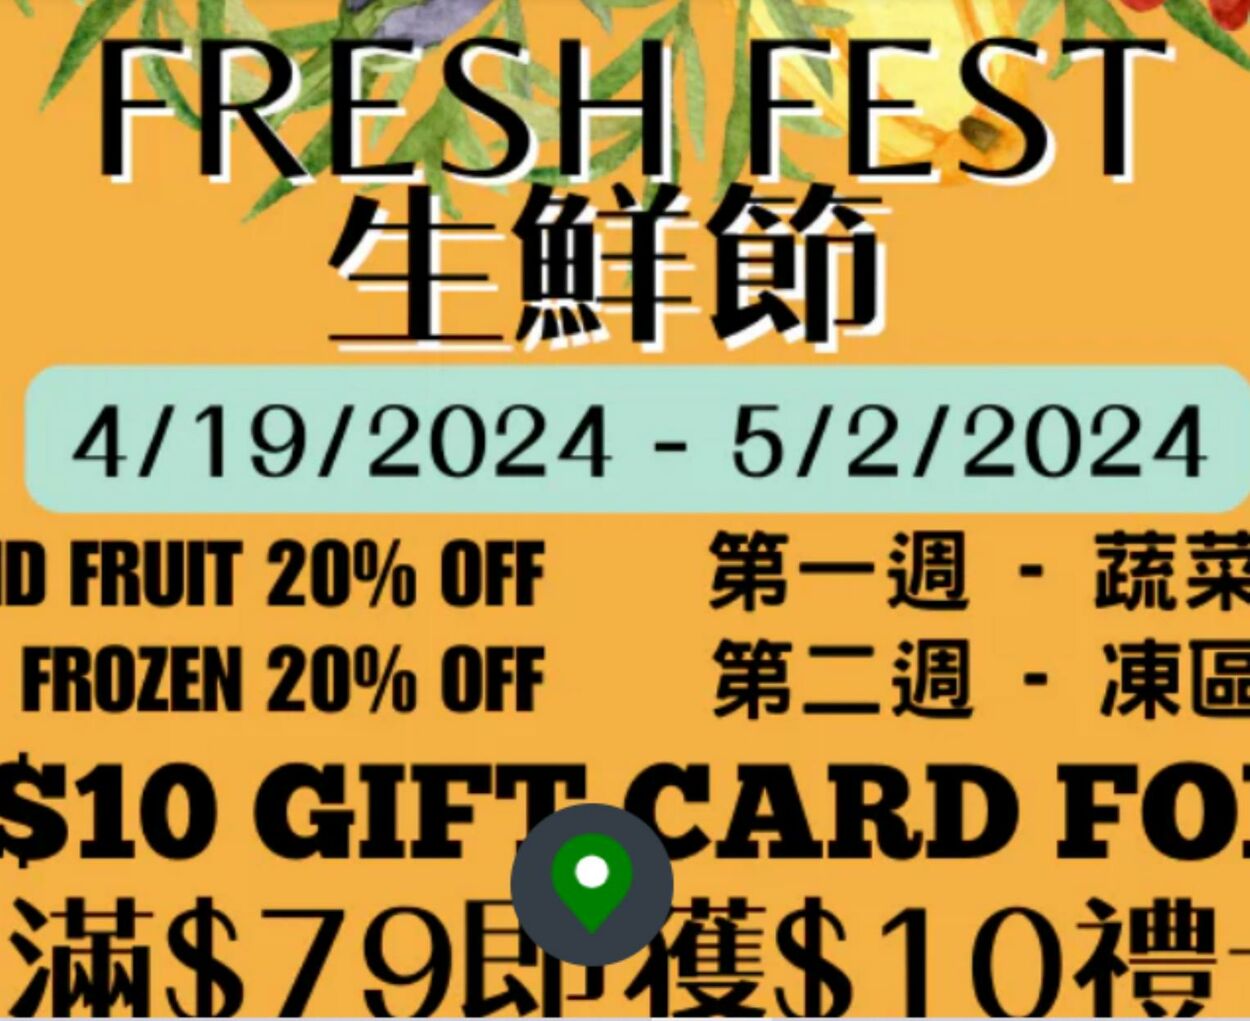 99 Ranch Market - 99 Fresh Promotional weekly ads